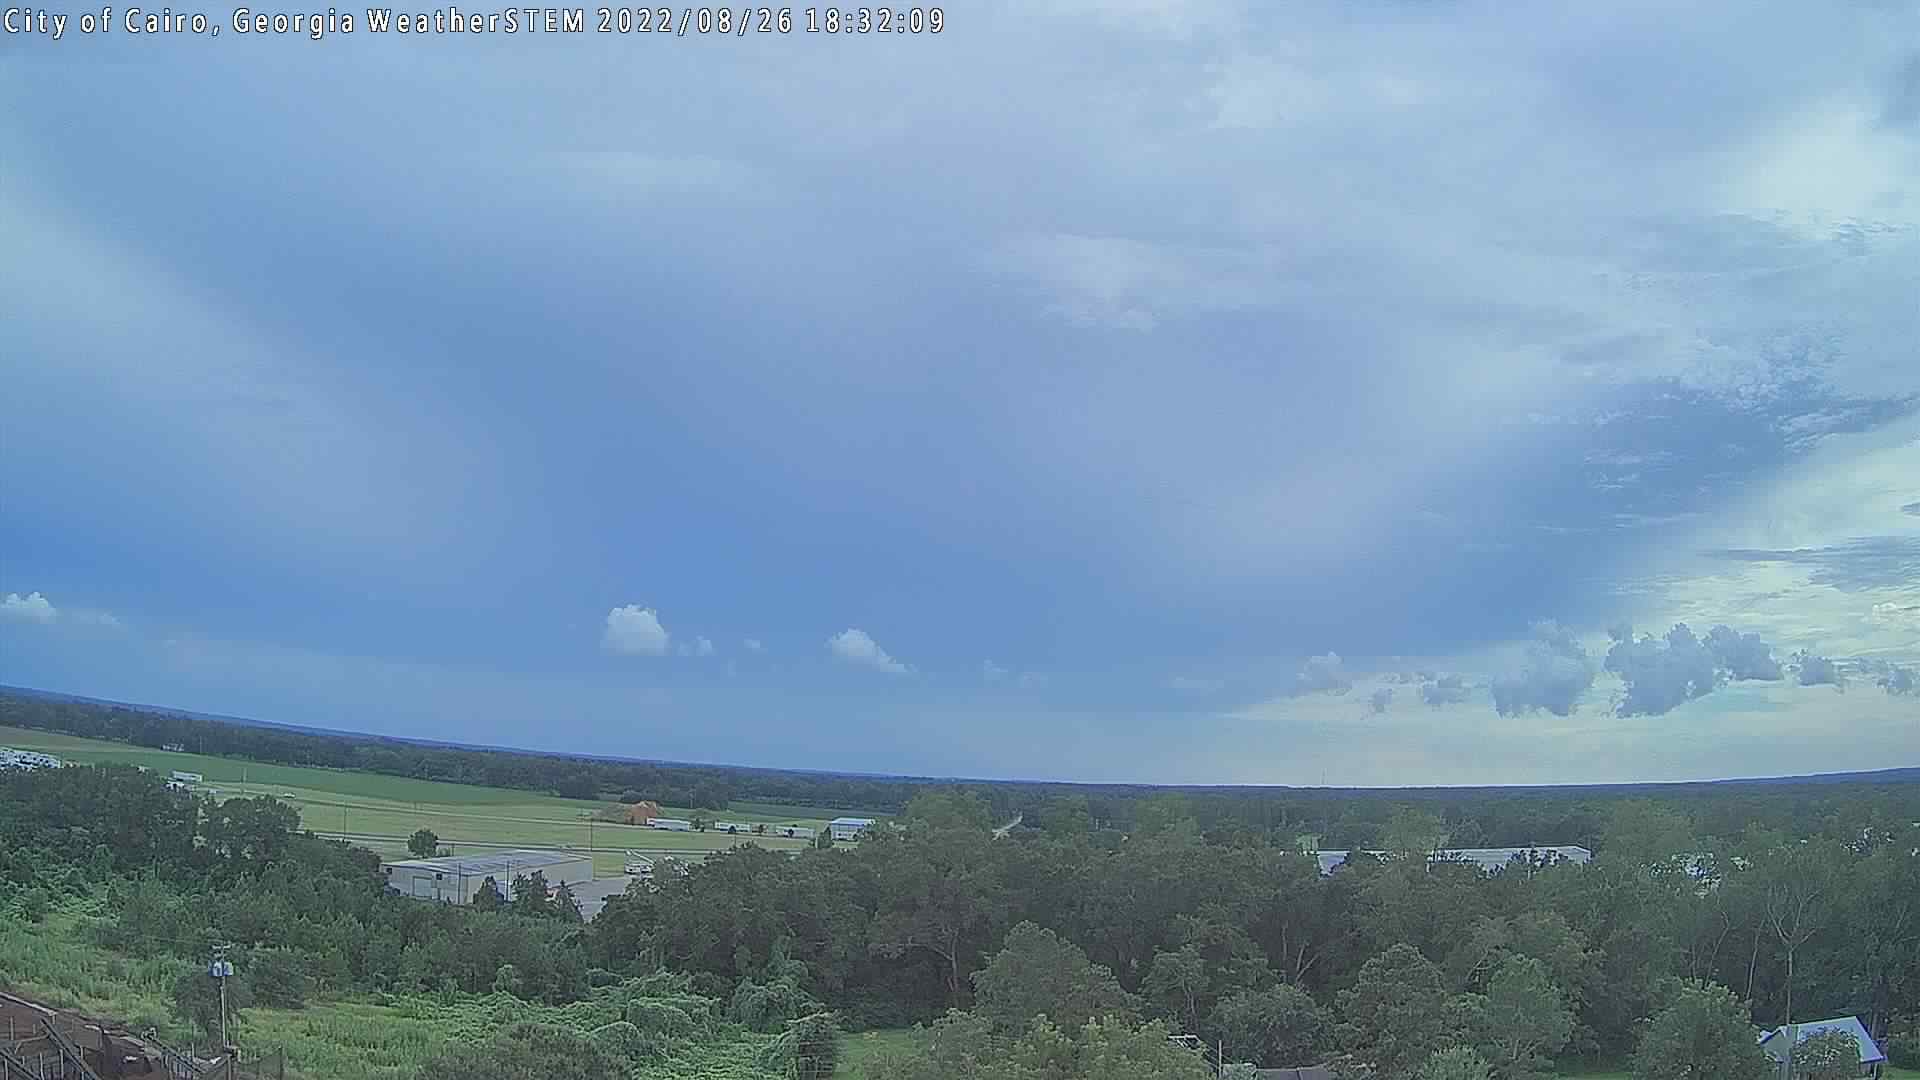  WeatherSTEM Cairo Facing South CairoWxSTEM in Grady County, Georgia GA at 